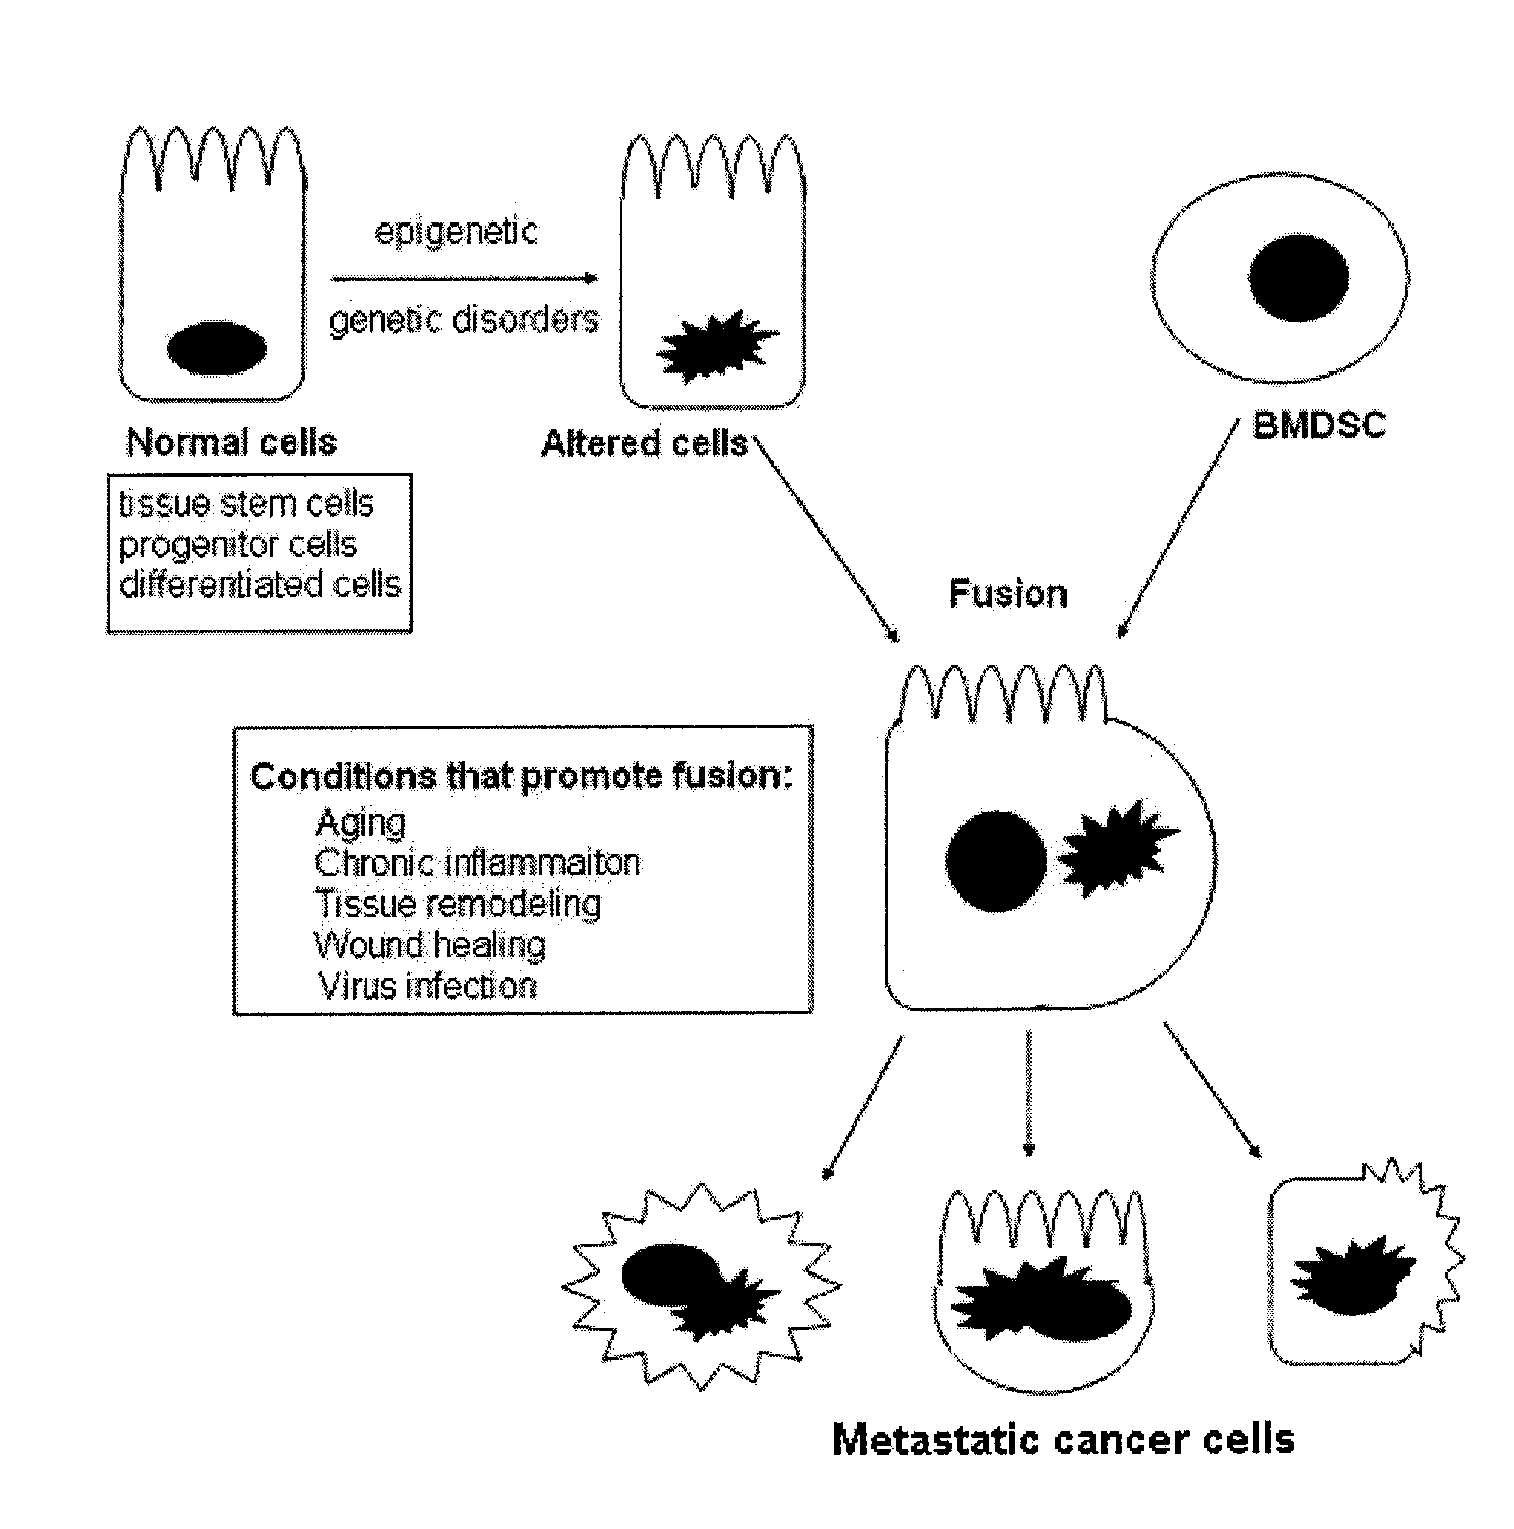 Stem Cell Fusion Model of Carcinogenesis